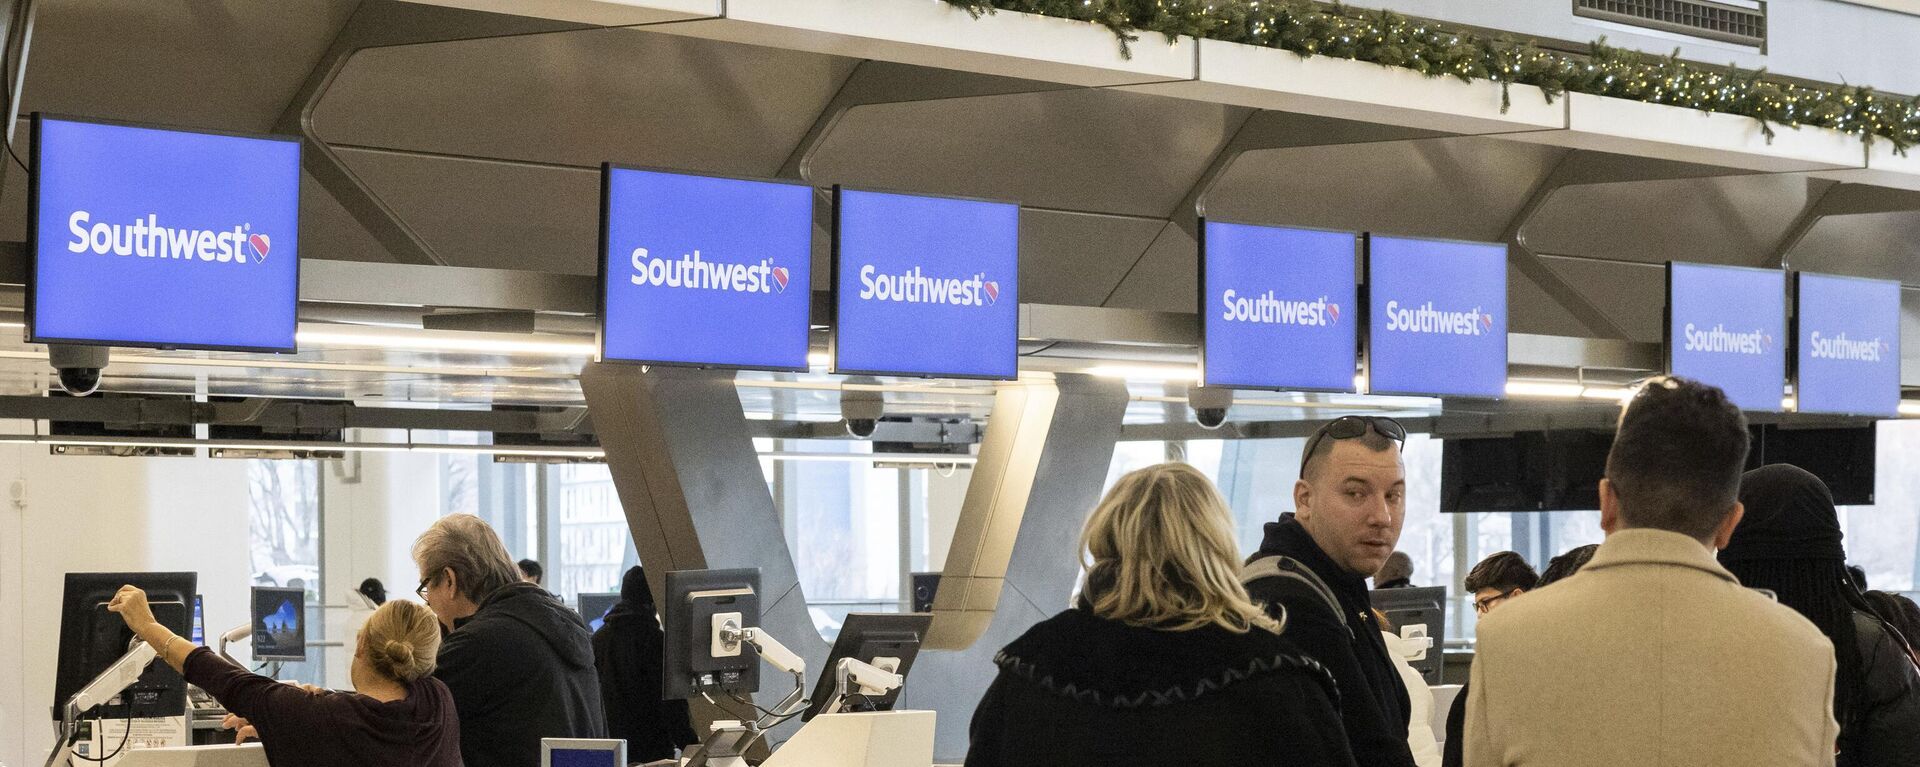 Passengers wait in line to check in for their flights at Southwest Airlines service desk at LaGuardia Airport, Tuesday, Dec. 27, 2022, in New York.  - Sputnik International, 1920, 13.01.2023